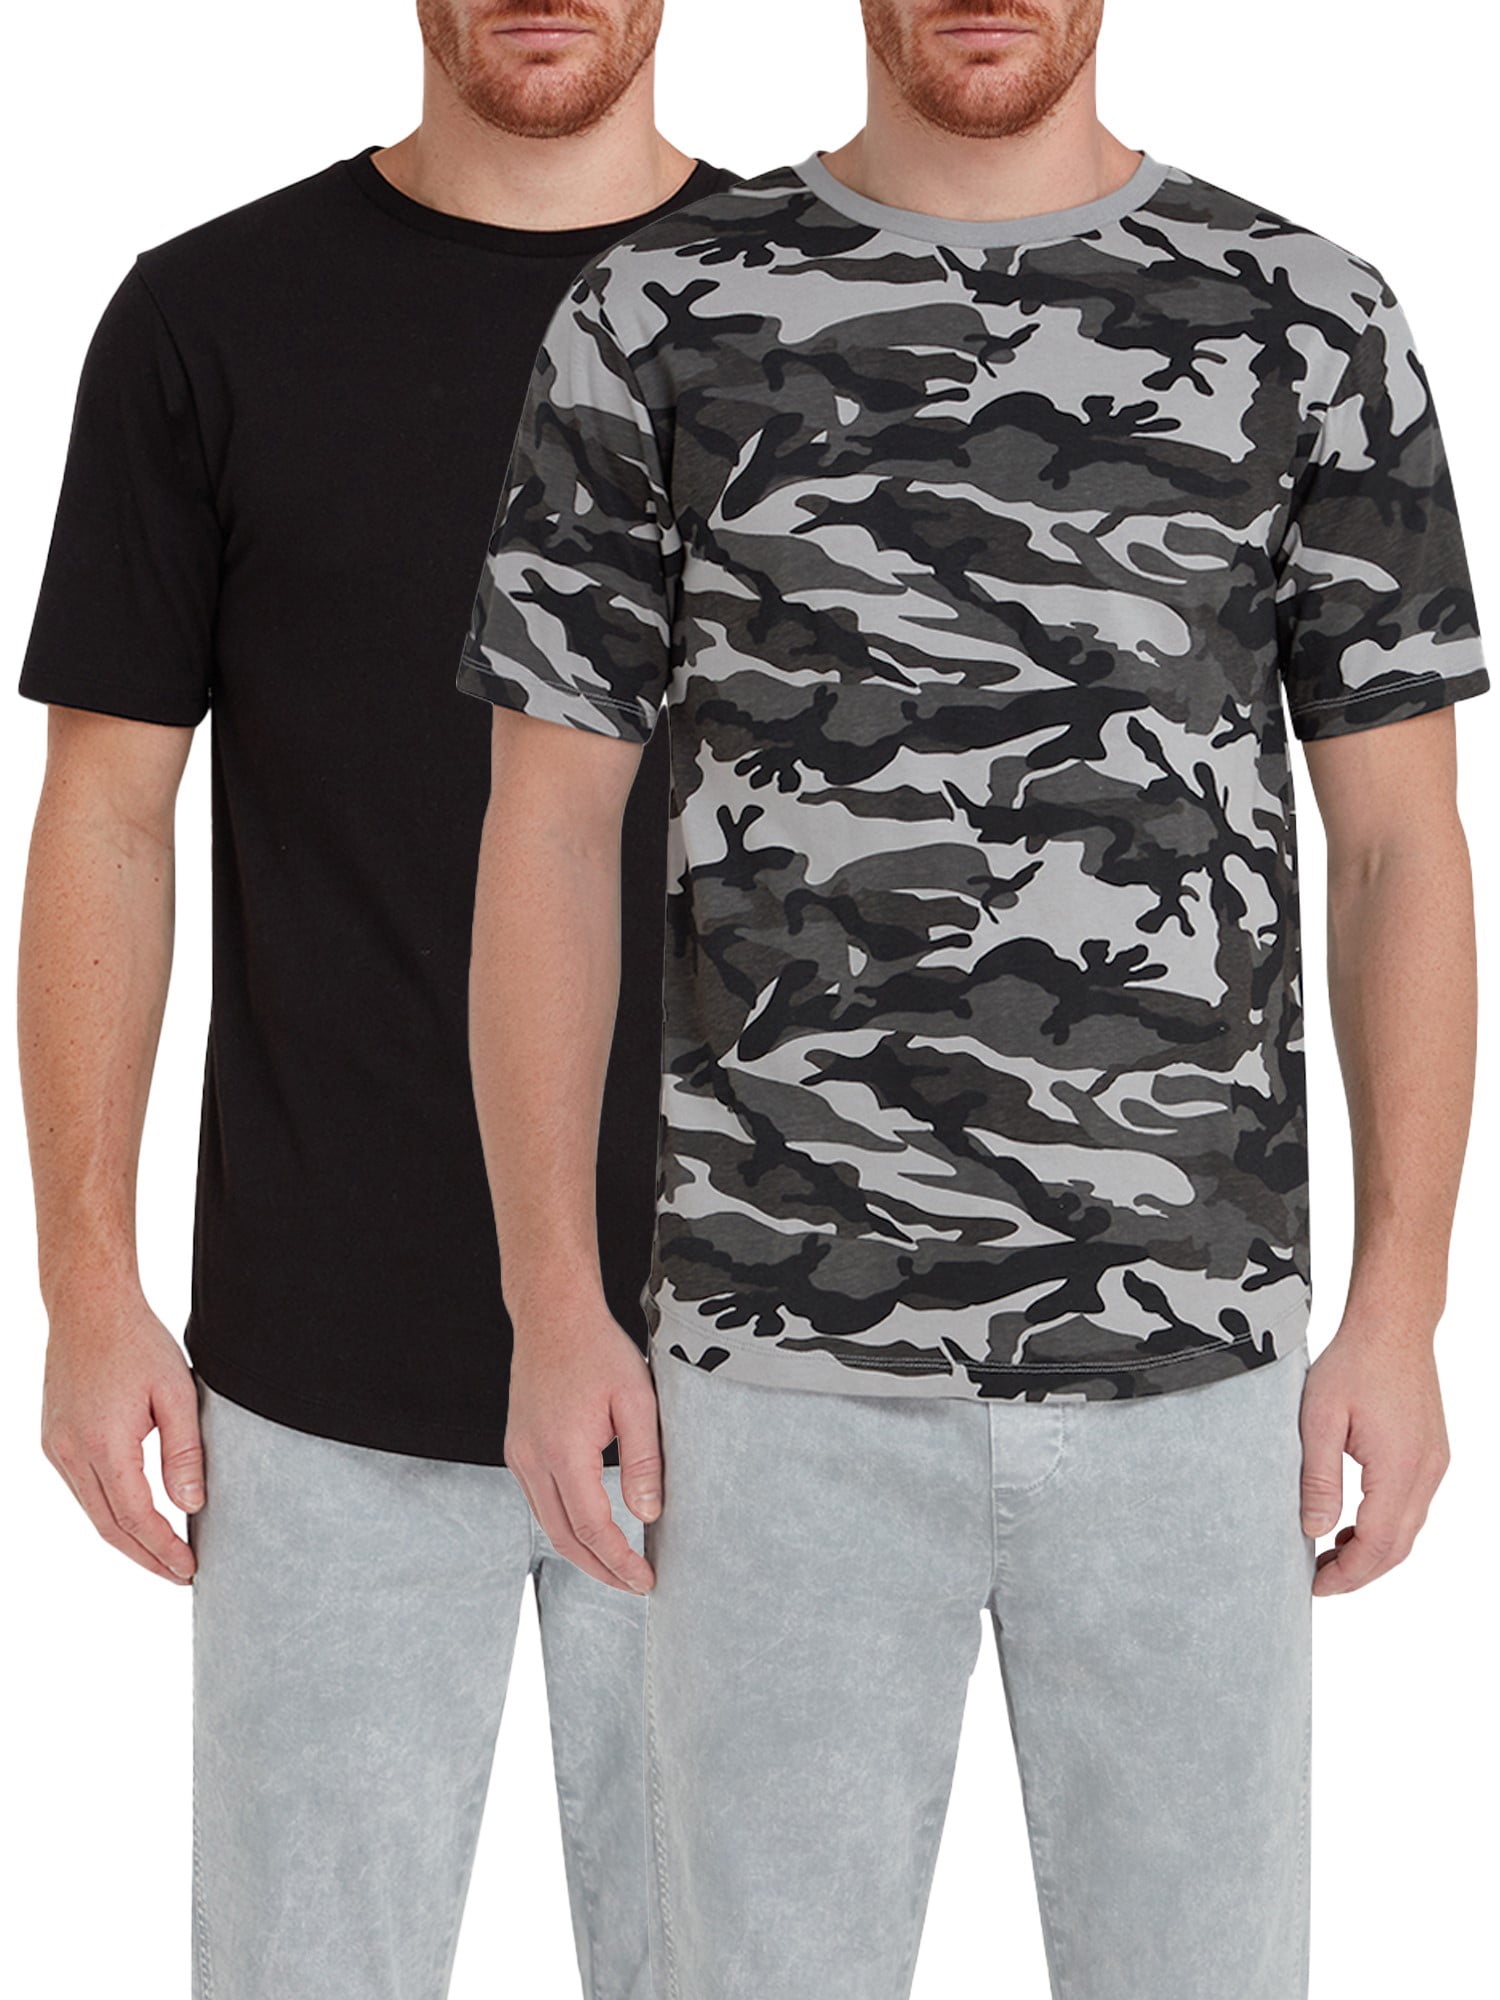 Solid Cooper Mens Camouflage Long Sleeve T-Shirt Top with Crew Neck Made of 100% Cotton 